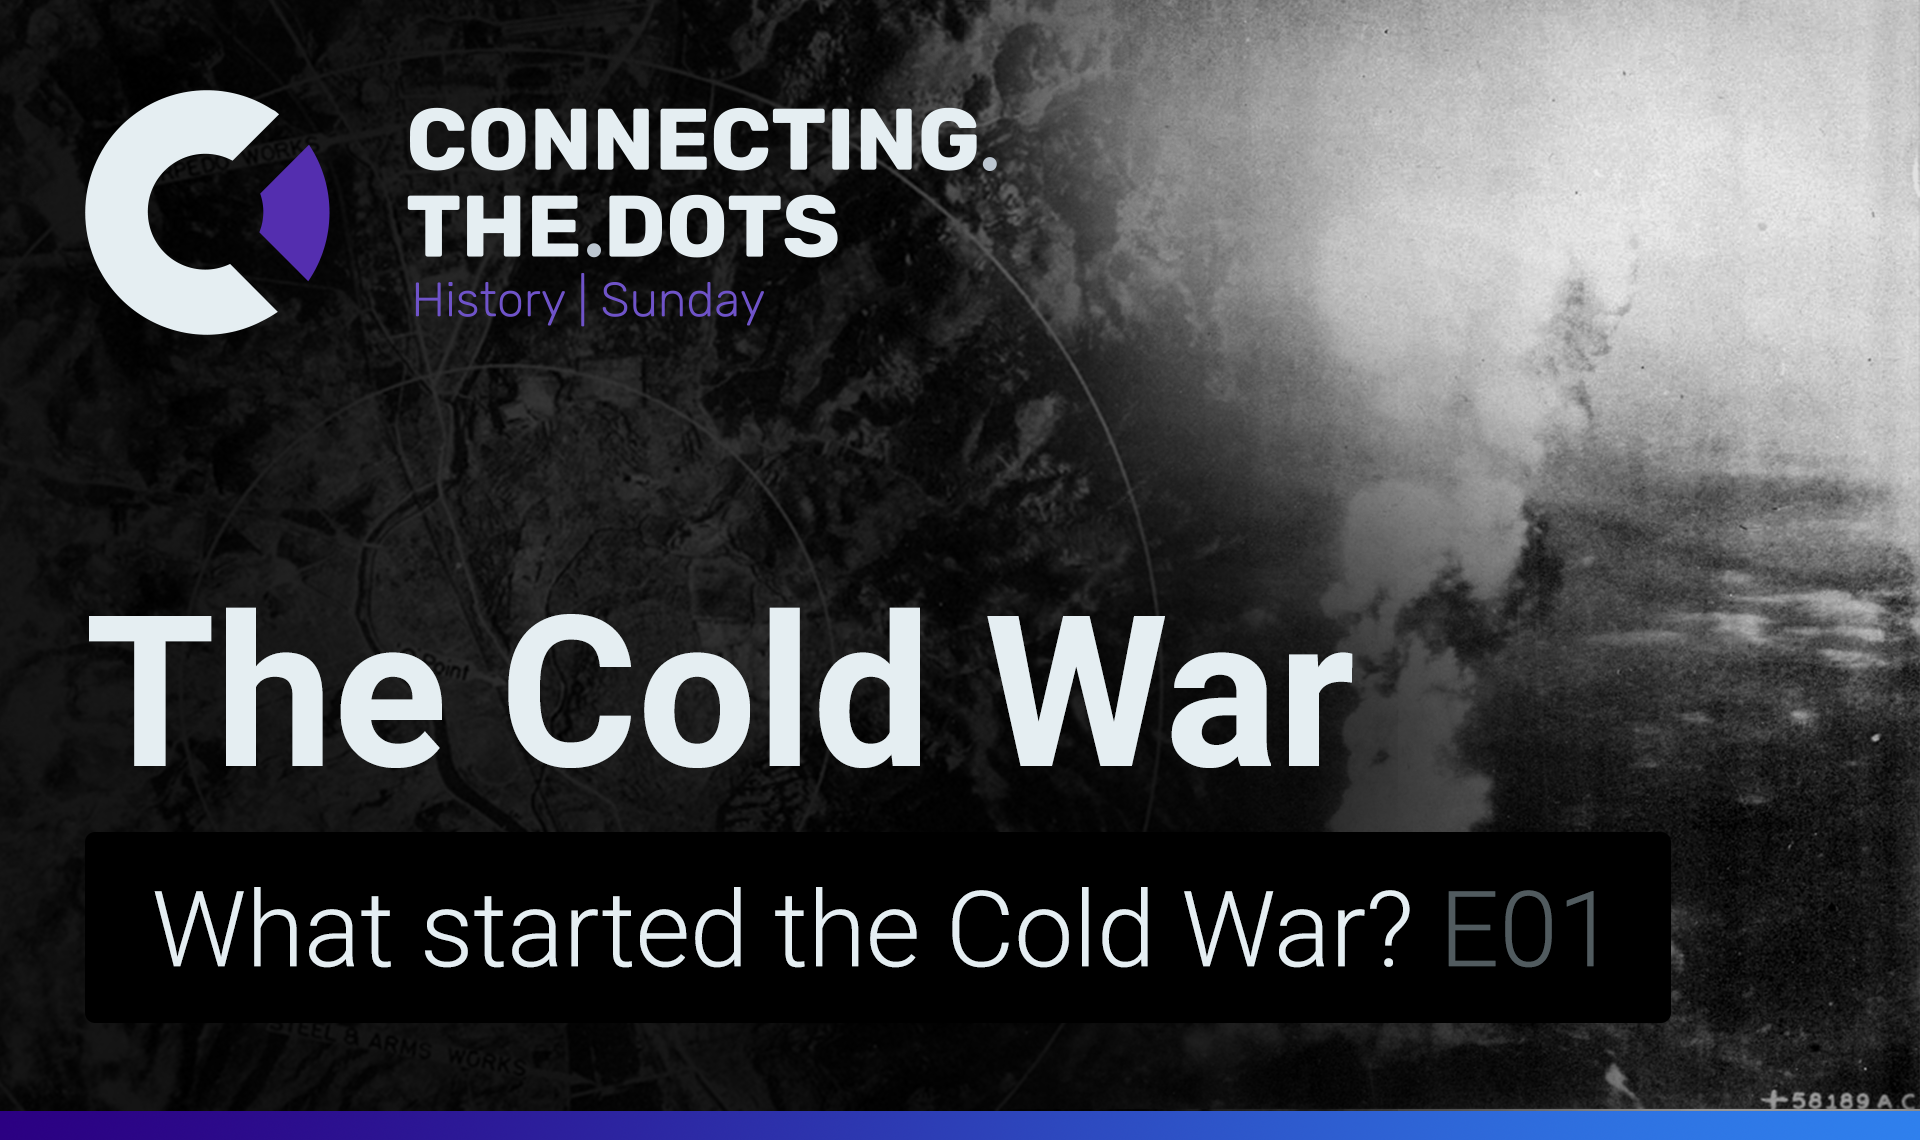 the Cold War by Connecting.the.Dots